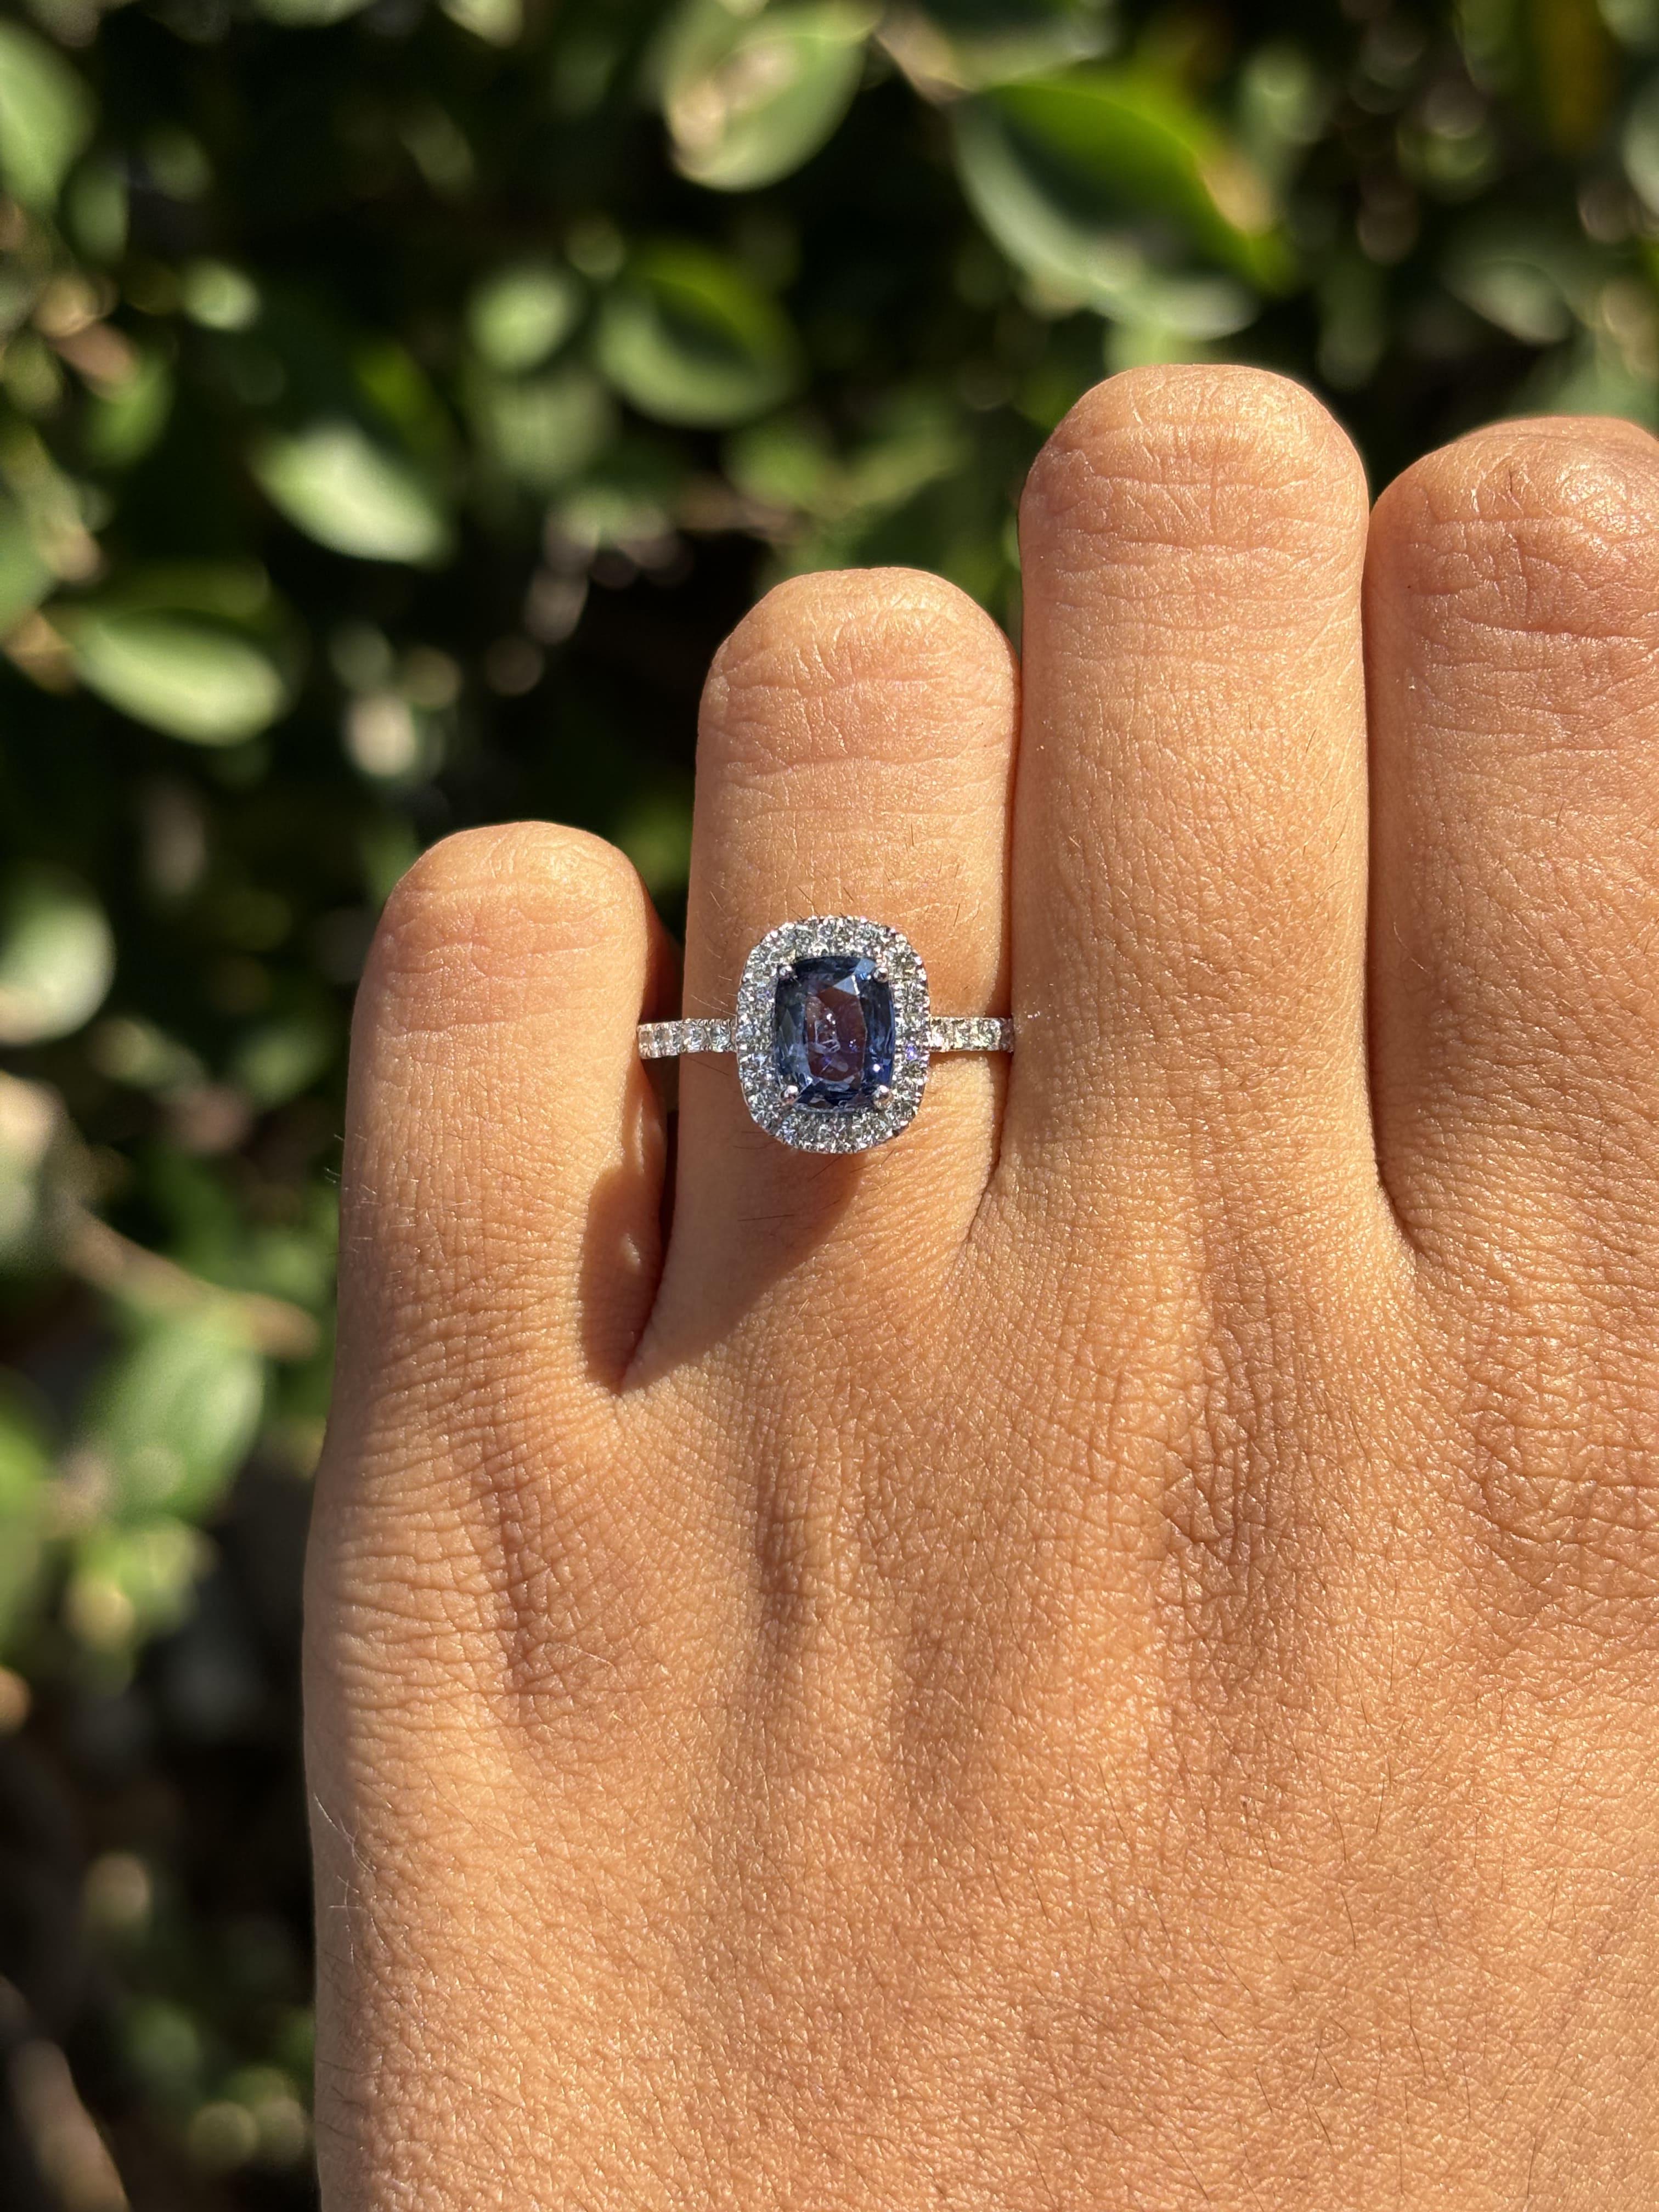 1.21 Carat Ceylon Blue Sapphire Ring with Halo Diamonds in 14K White Gold For Sale 4